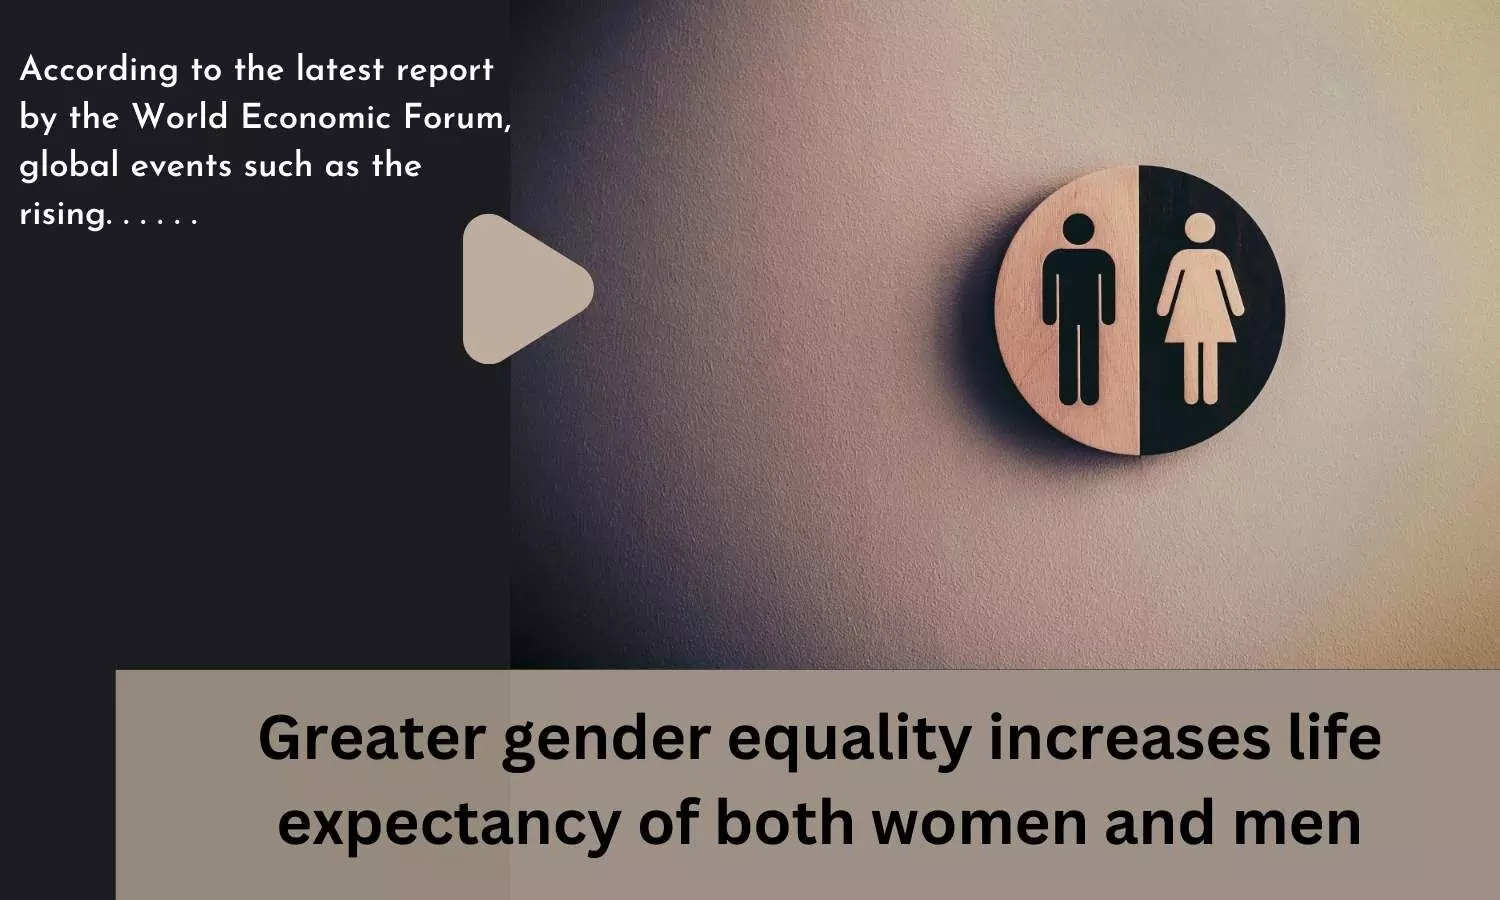 Greater gender equality increases life expectancy of both women and men